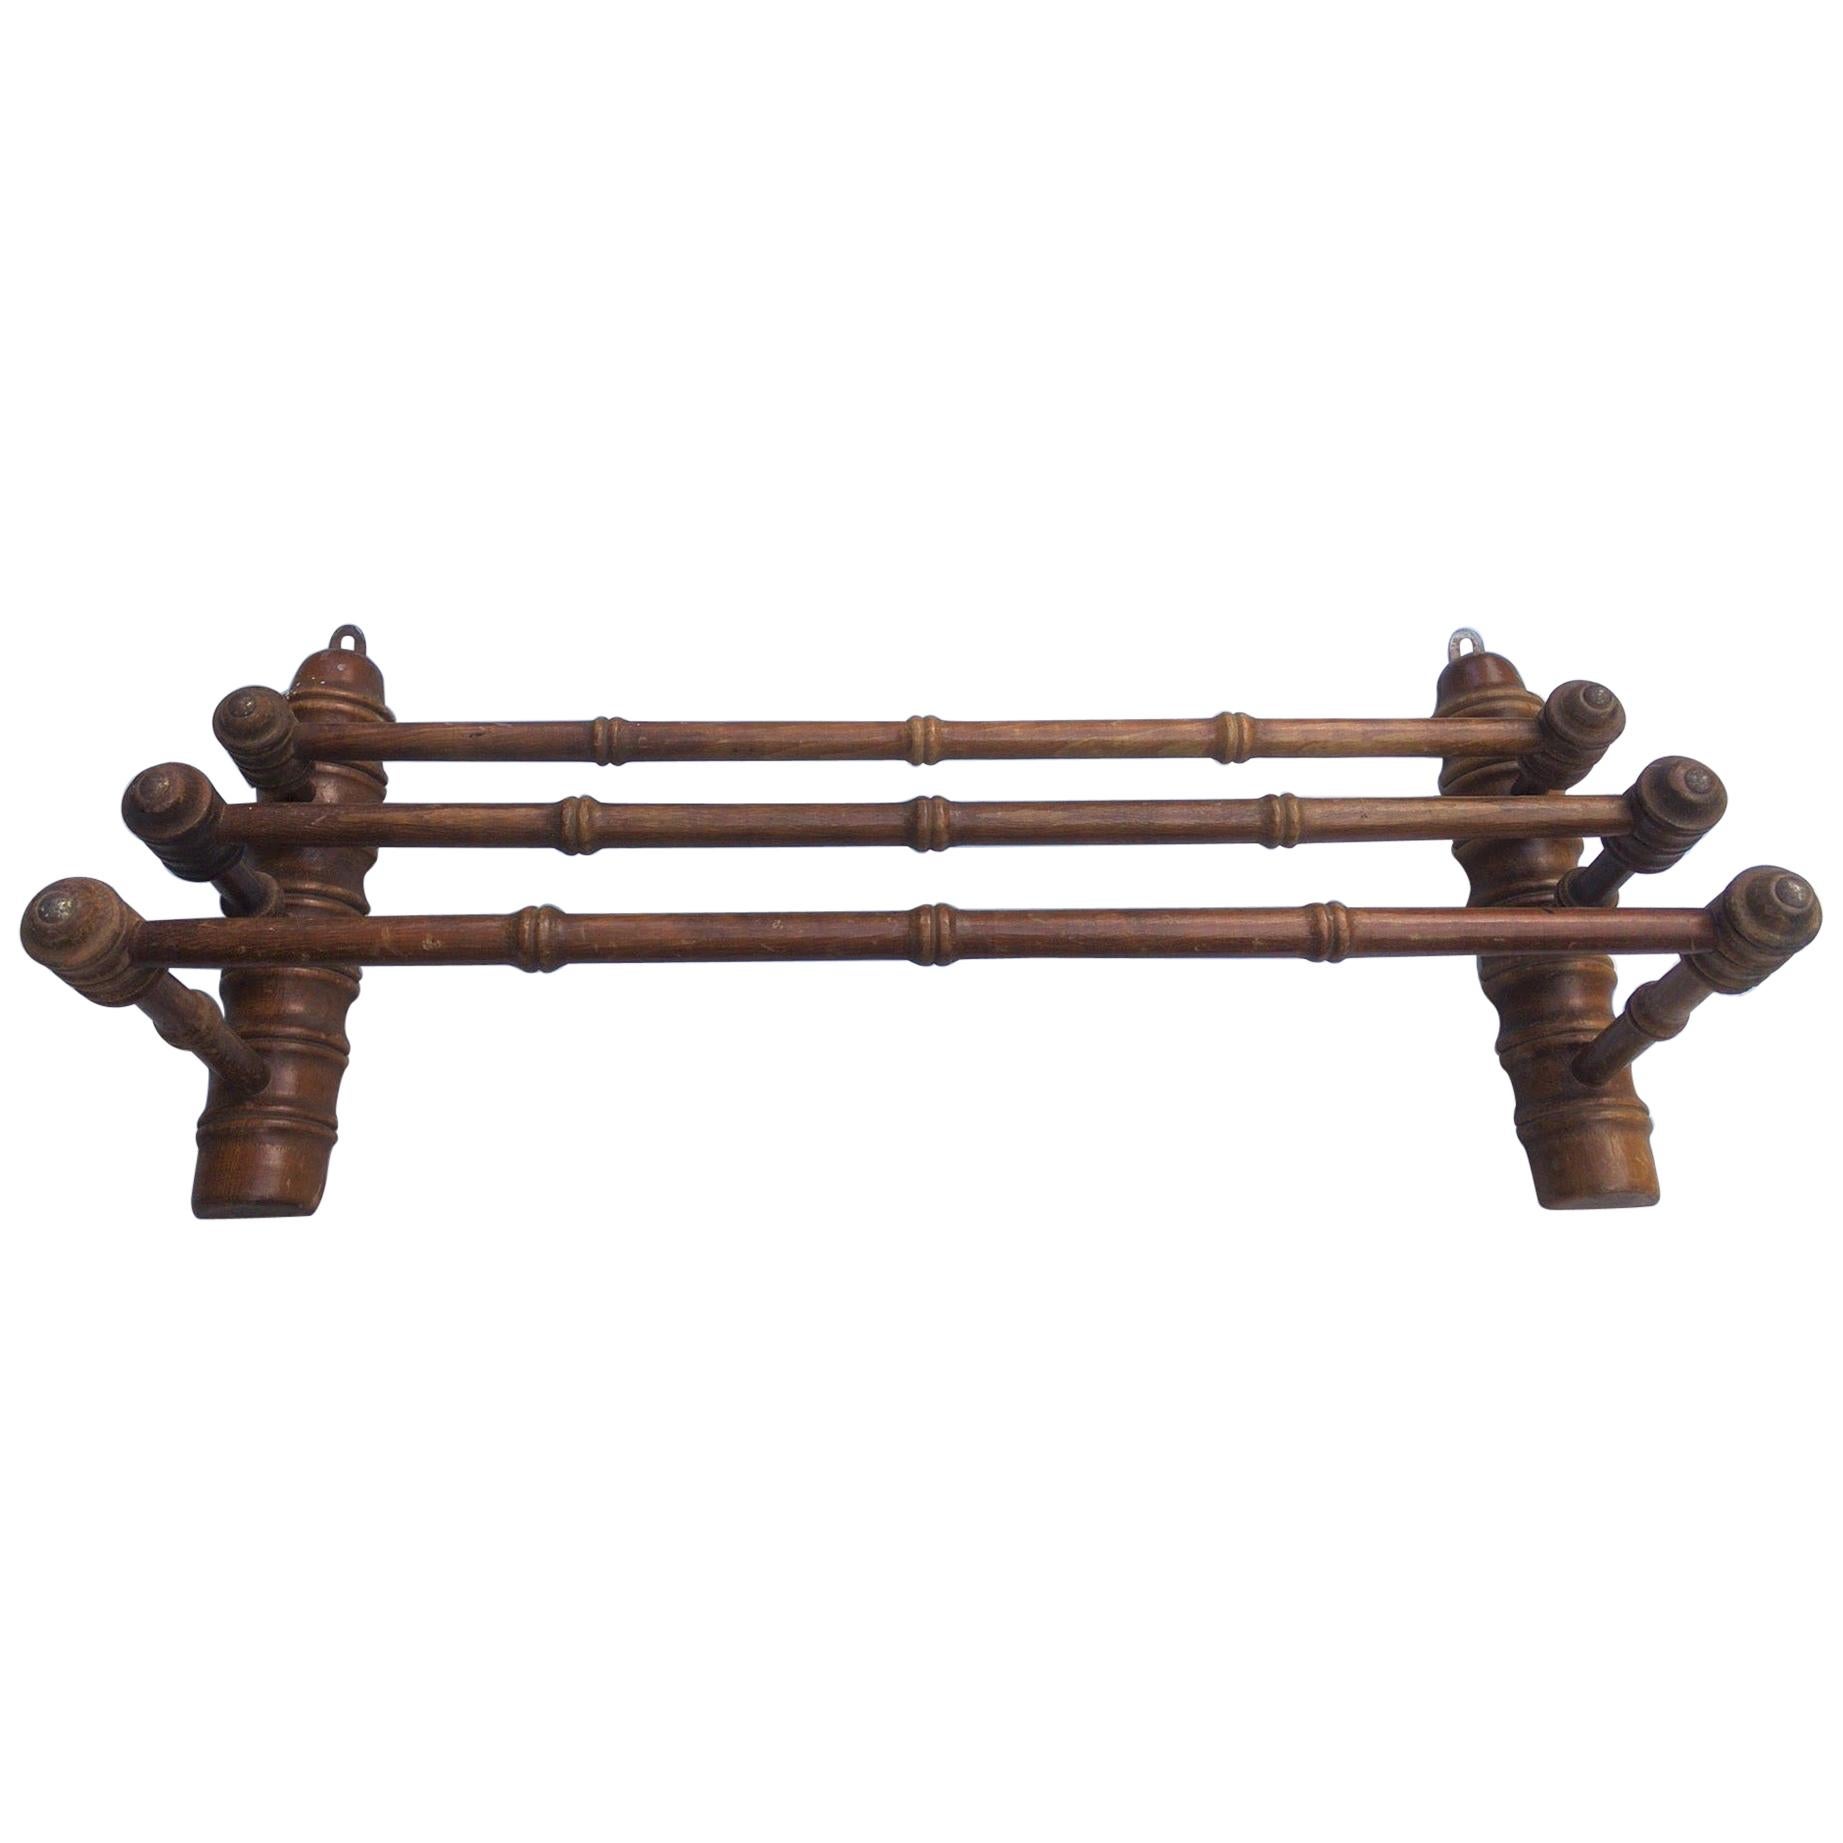 French Faux Bamboo Towel Holder, circa 1900